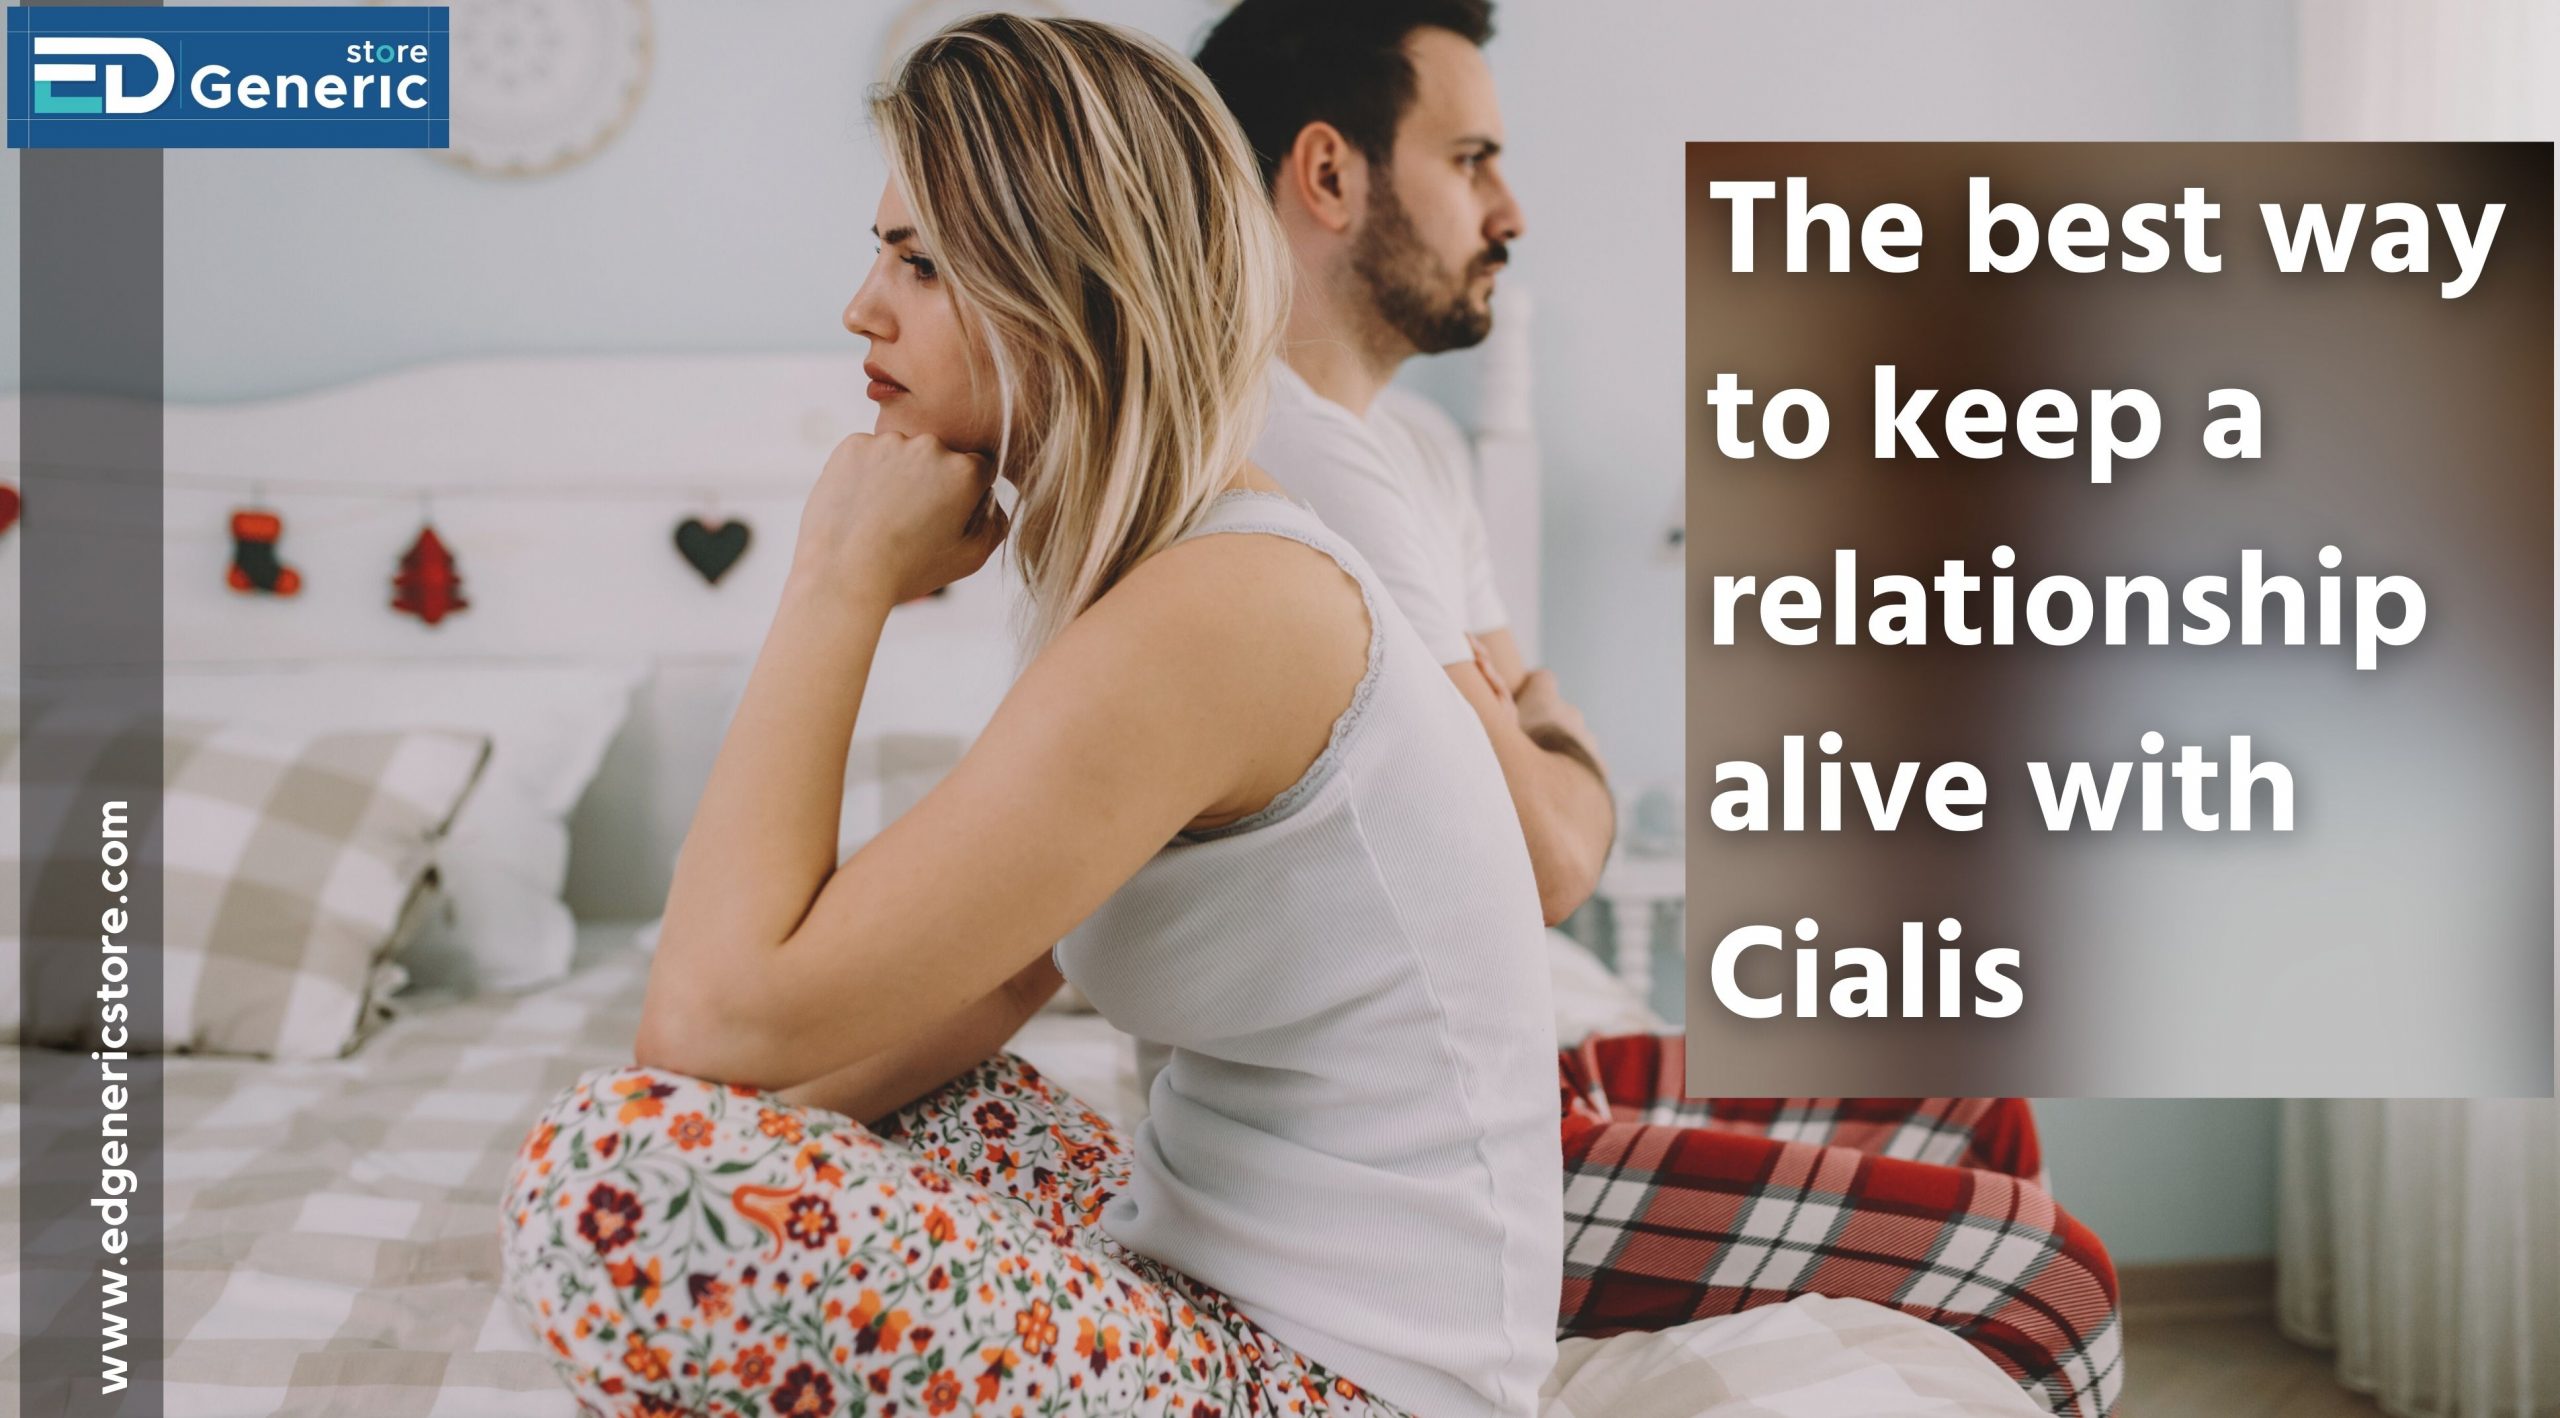 The best way to keep a relationship alive with Cialis